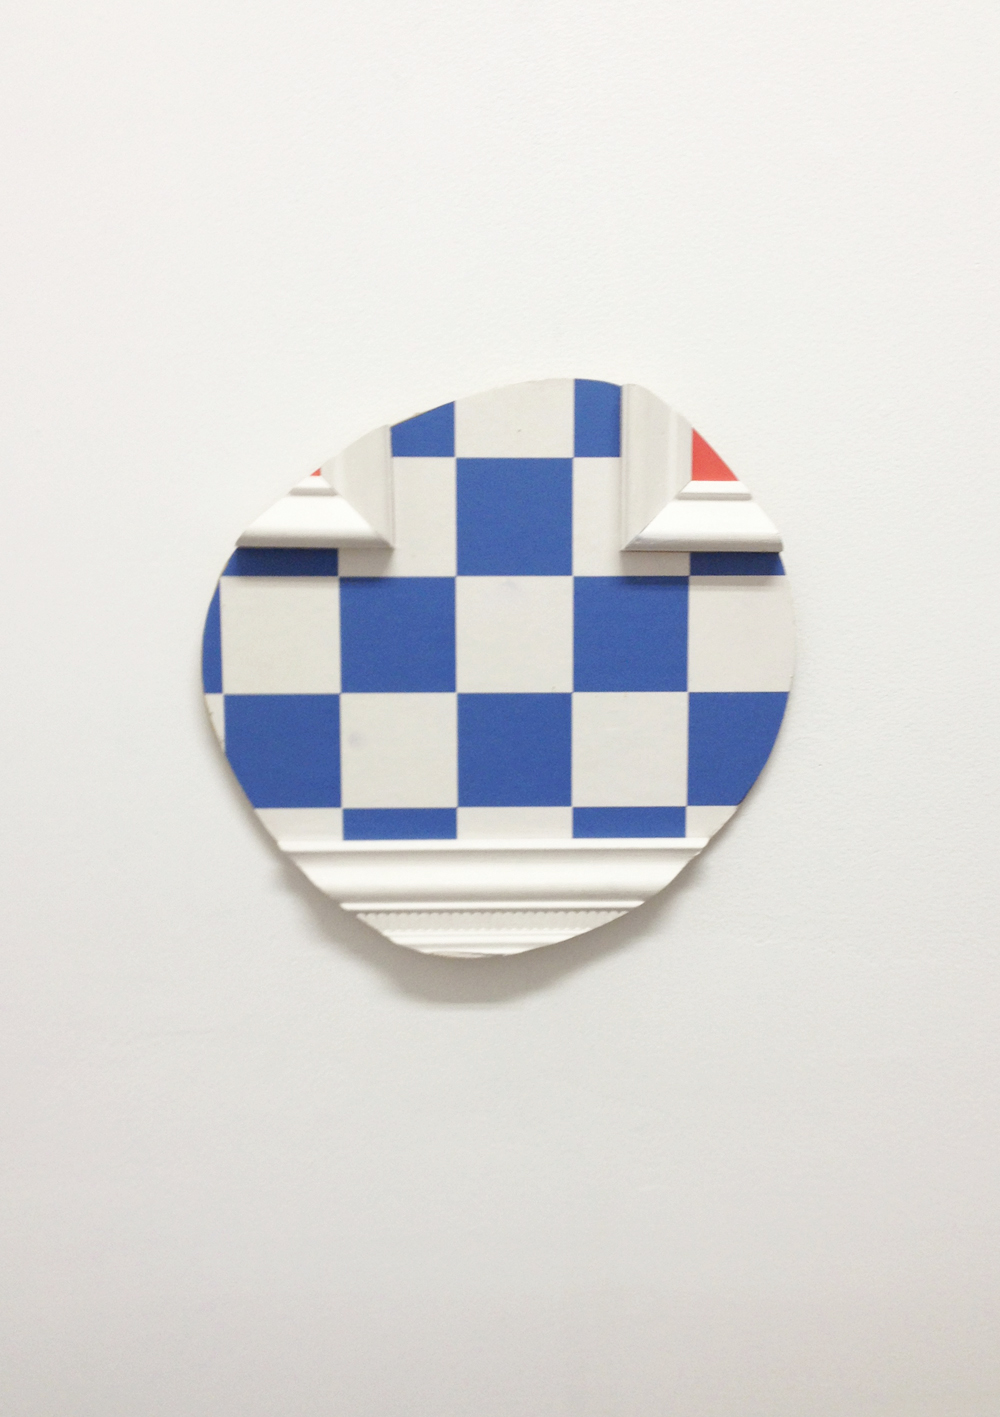 Untitled (checkers), 2012